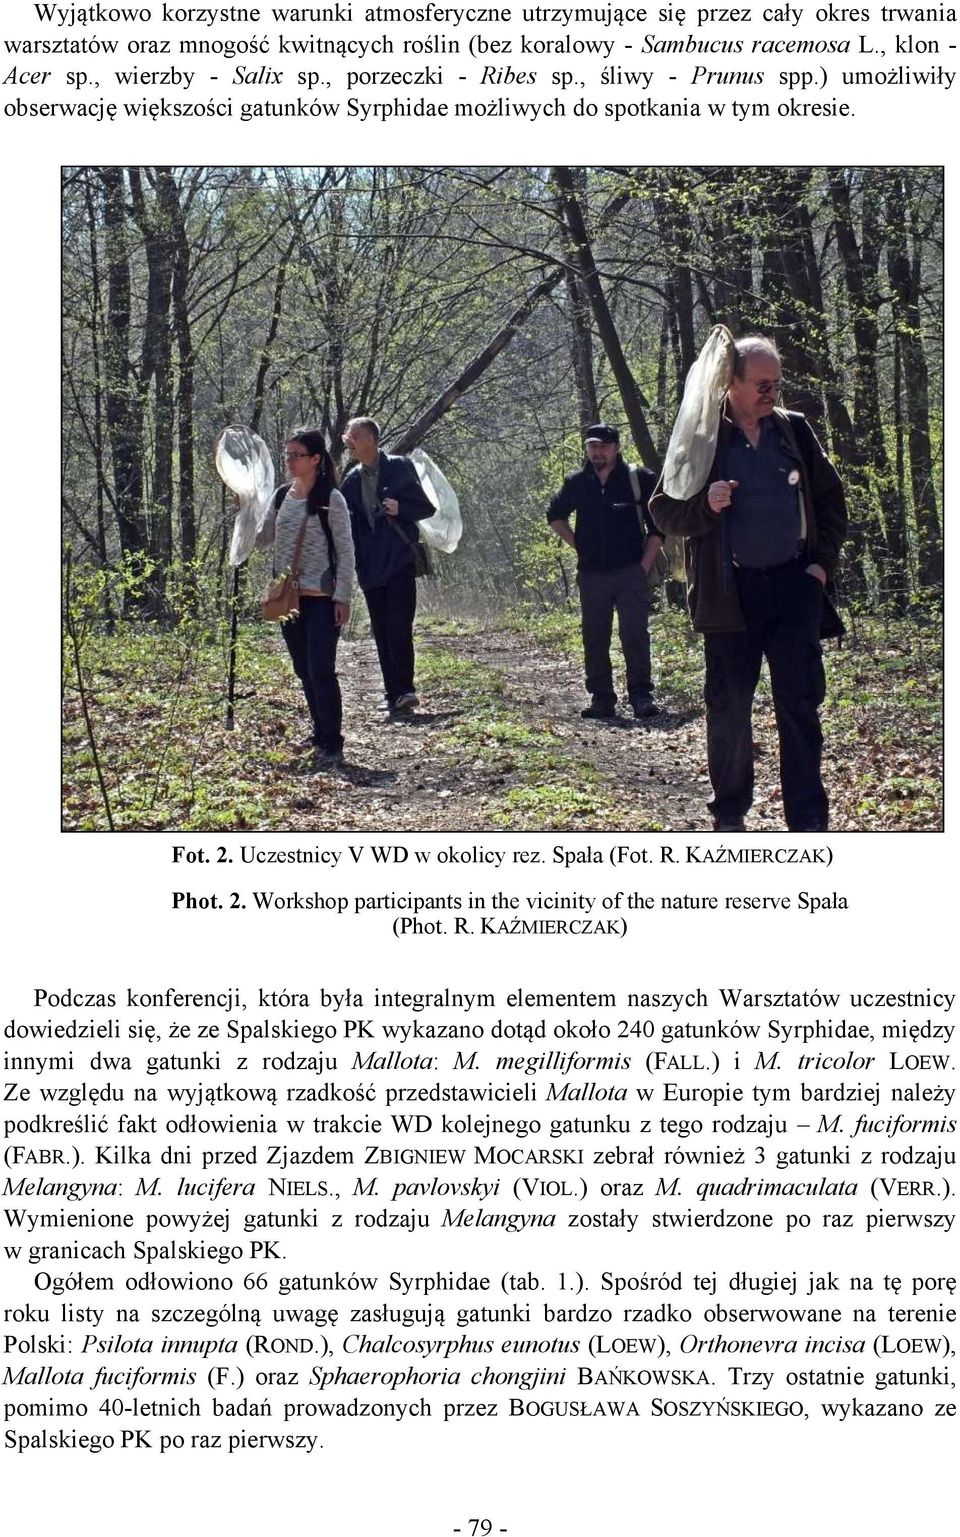 2. Workshop participants in the vicinity of the nature reserve Spała (Phot. R.